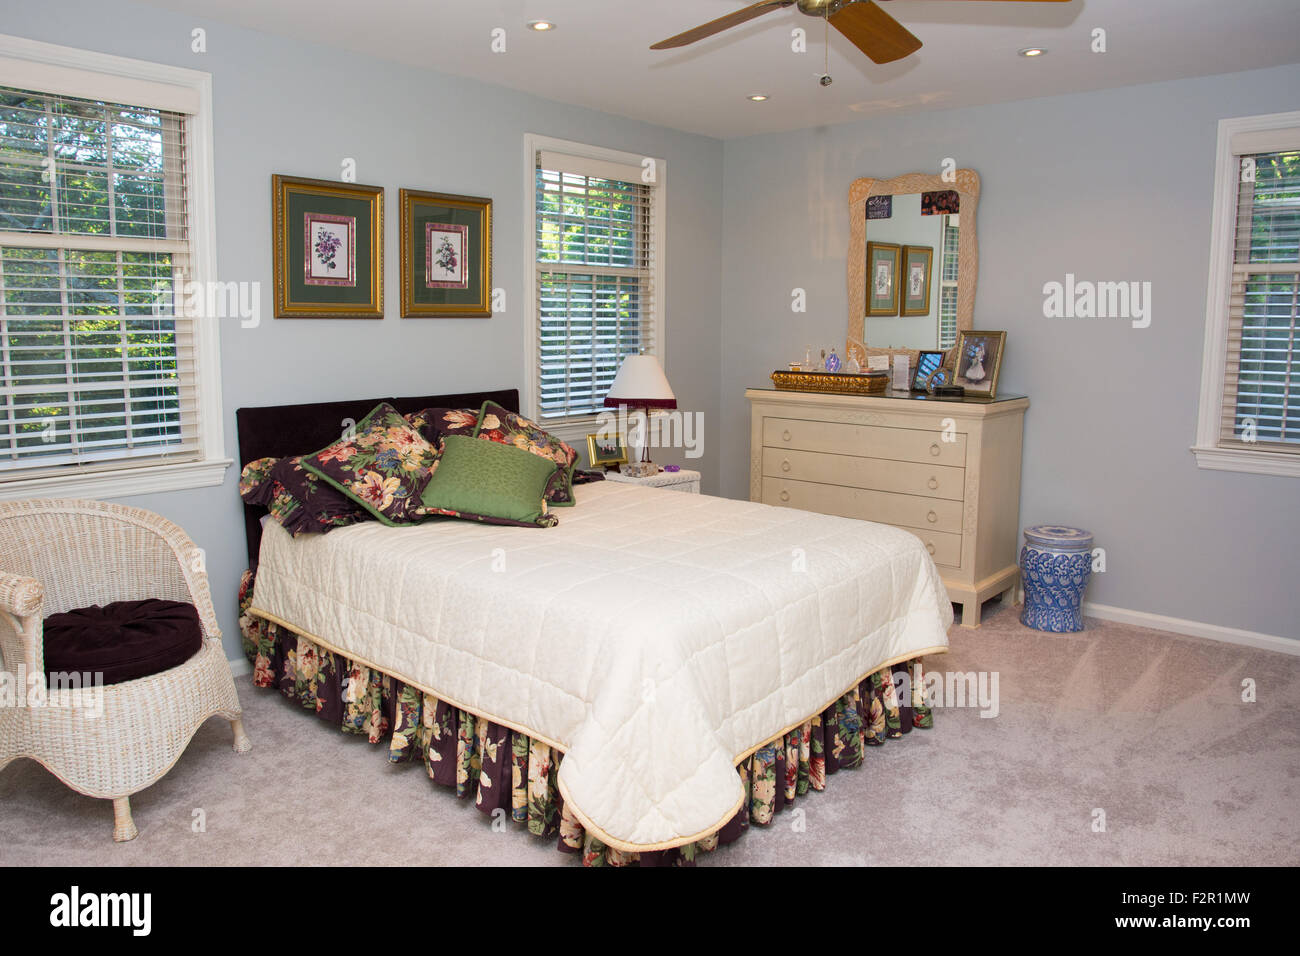 A view of a home's bedroom, including a bed and dresser, with a ceiling fan. Stock Photo